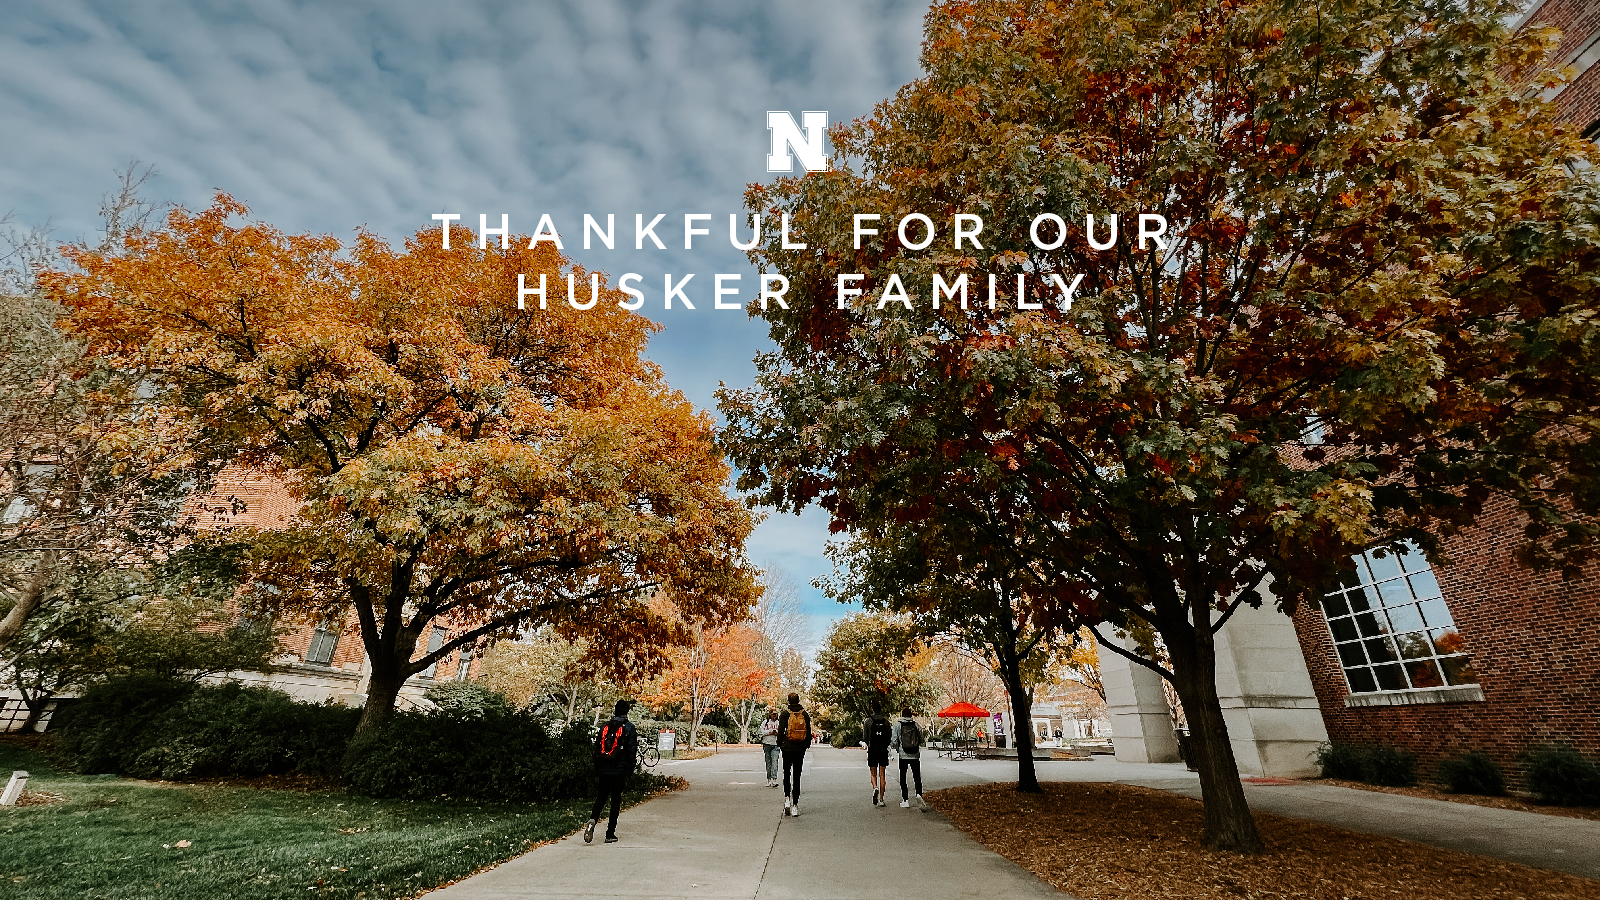 Thankful for our Husker family.